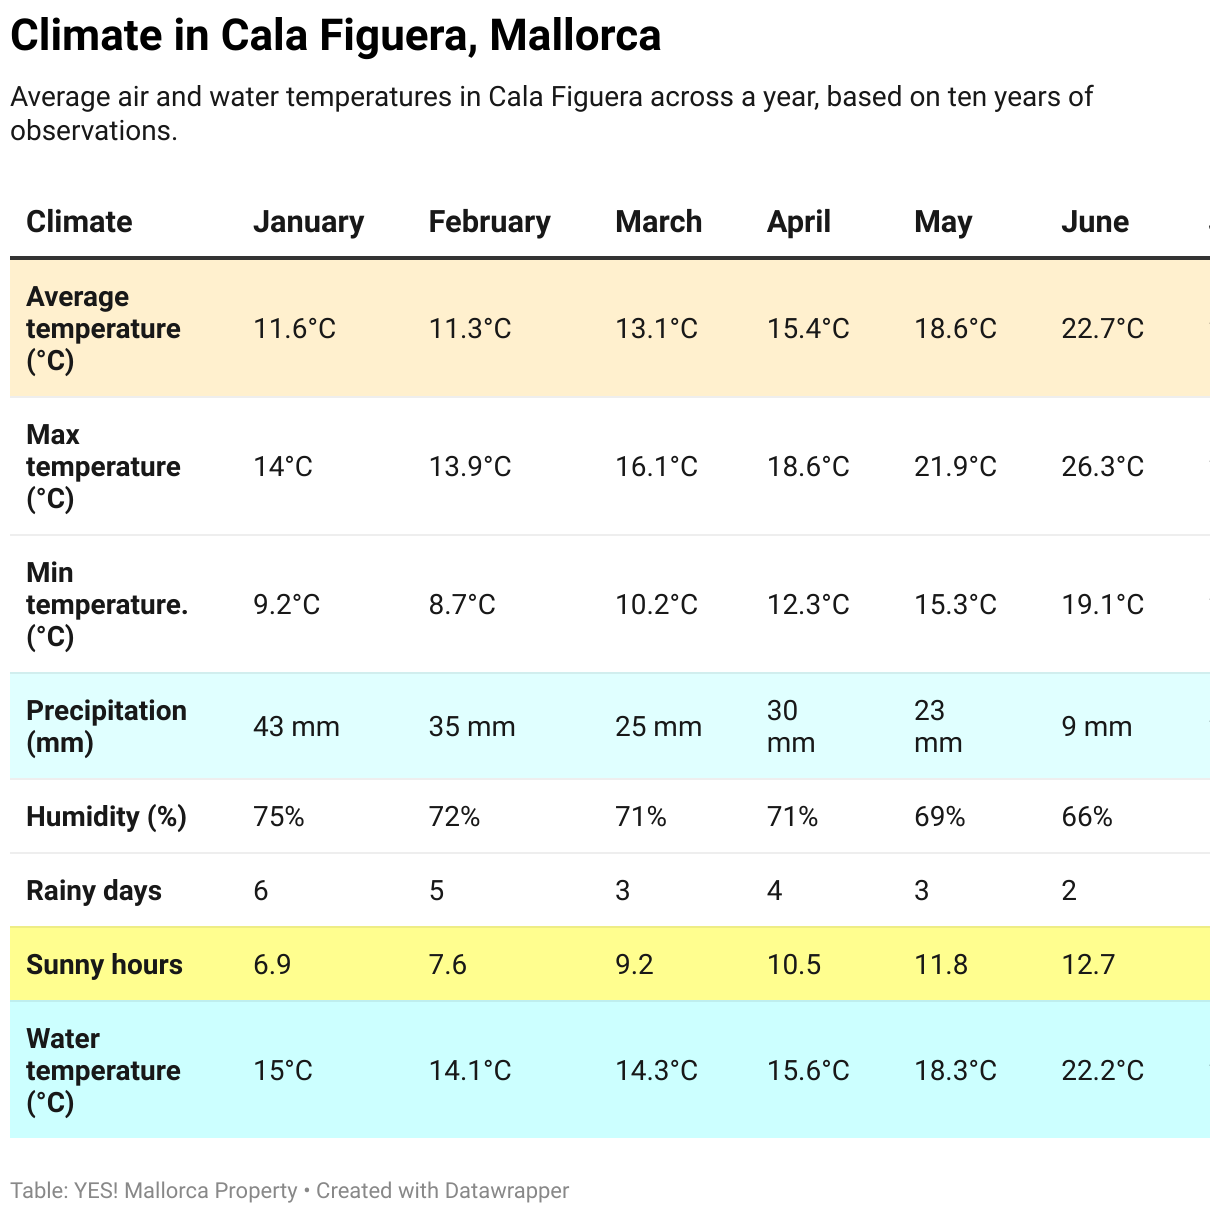 Average air and water temperatures in Cala Figuera across a year, based on ten years of observations.